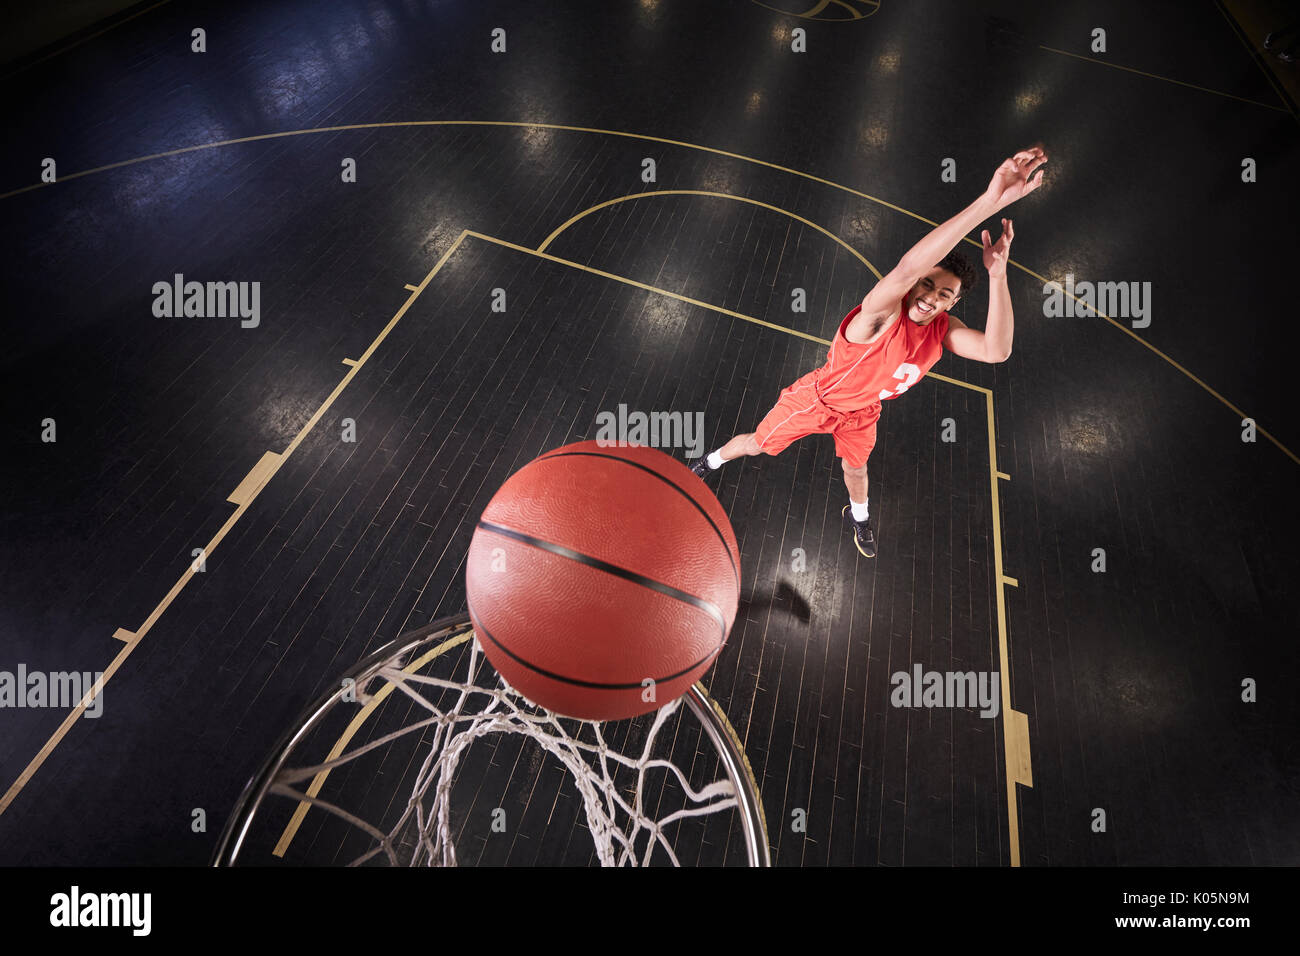 Young male basketball player shooting the ball on court in gymnasium Stock Photo